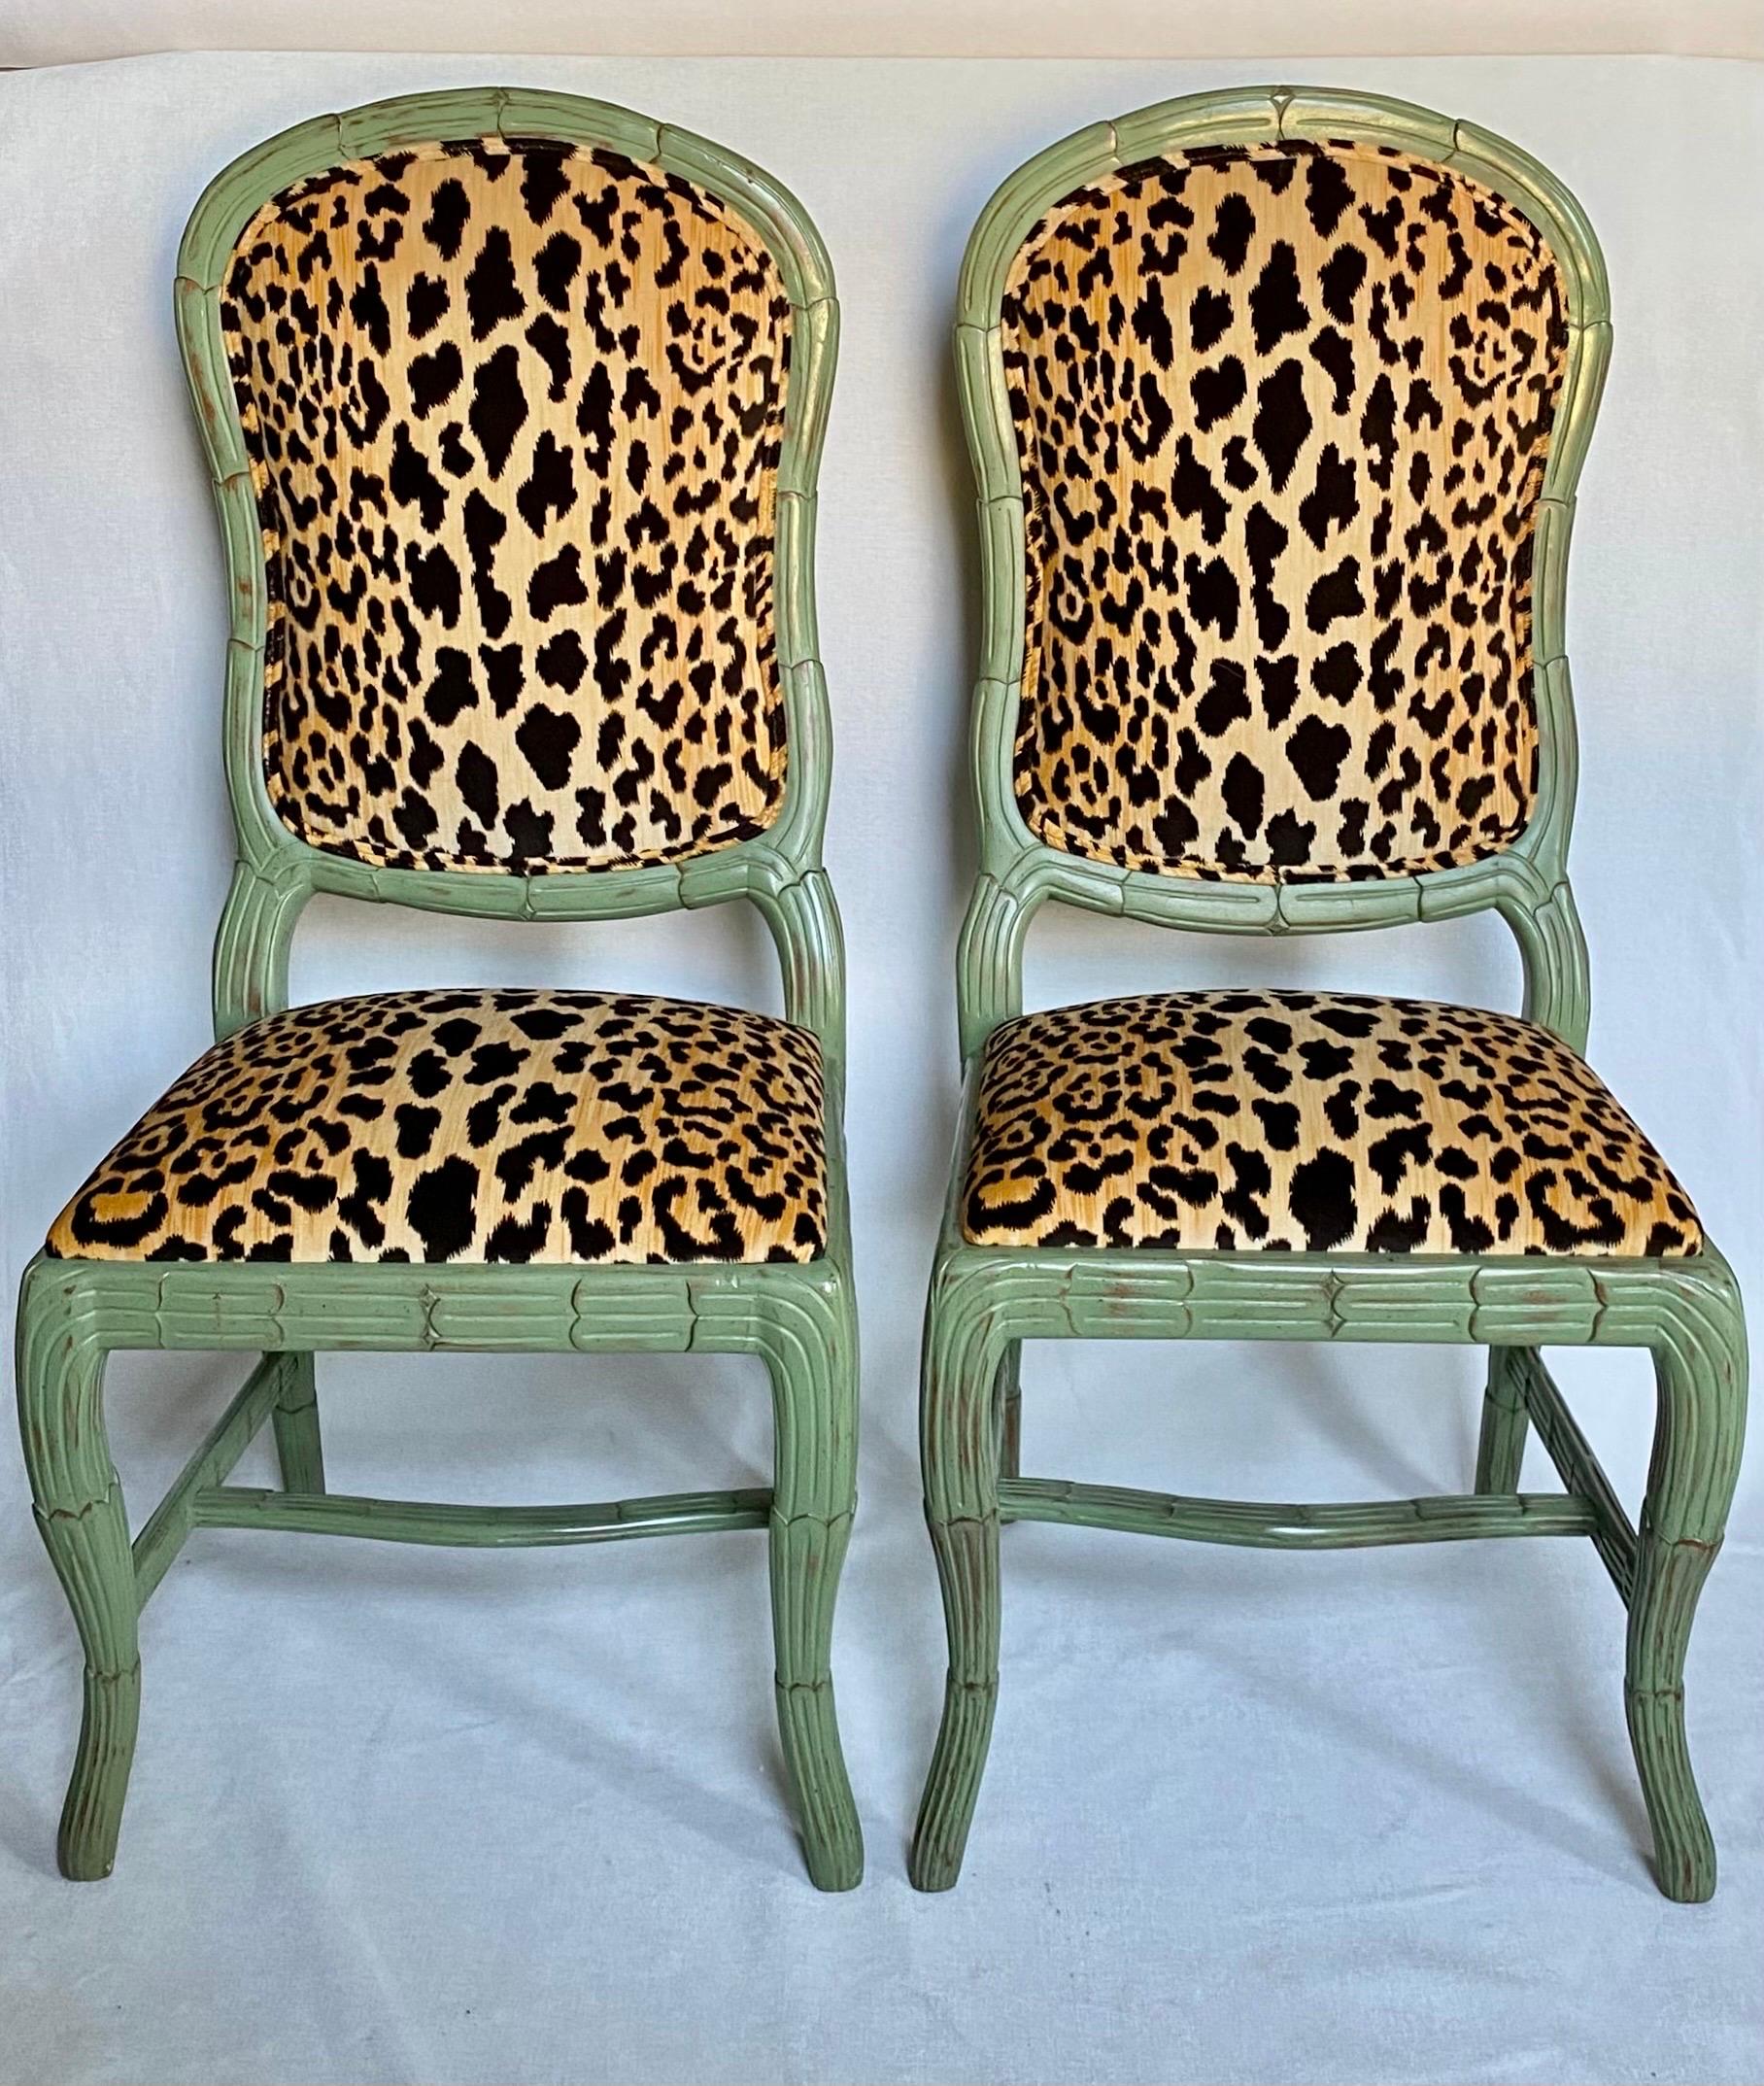 Fabulous Hollywood Regency Serge Roche style carved palm armless chairs newly upholstered in a graphic animal print cotton velvet fabric. These sculptural chairs feature a dimensional and incredibly detailed carved wood palm tree design with